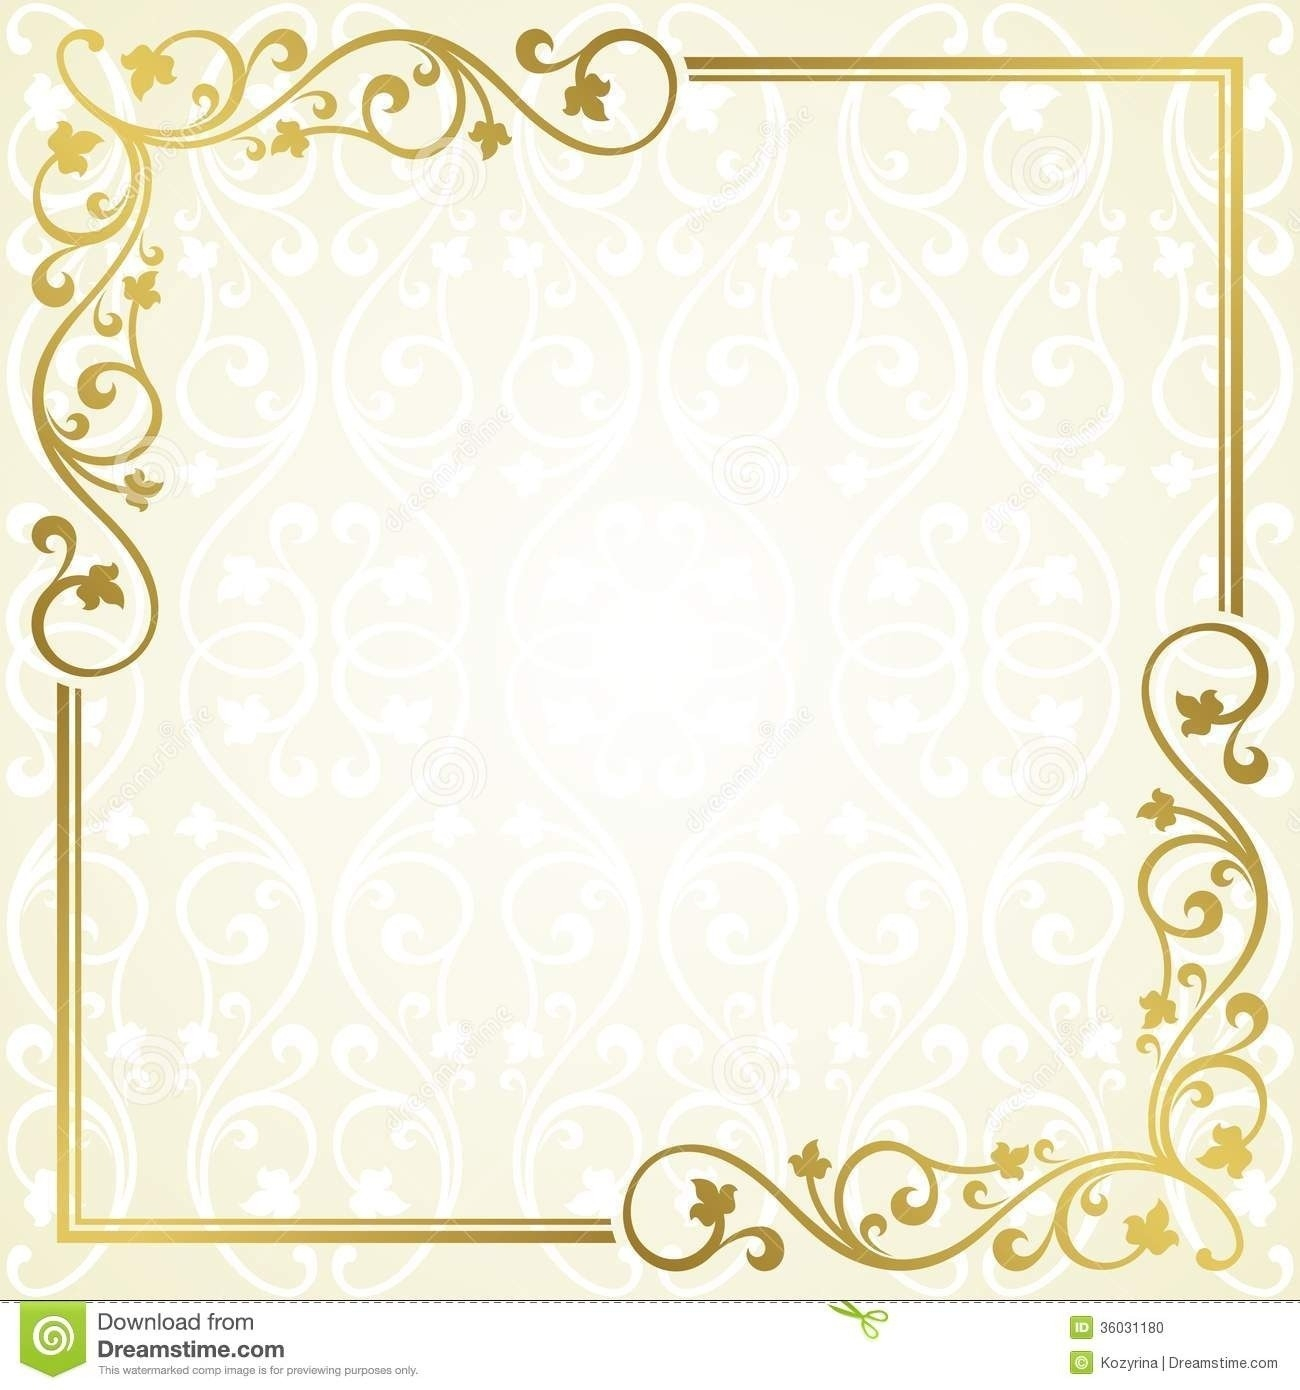 90 Create Amazing Blank Invitation Card Template Design Online With in measurements 1300 X 1390